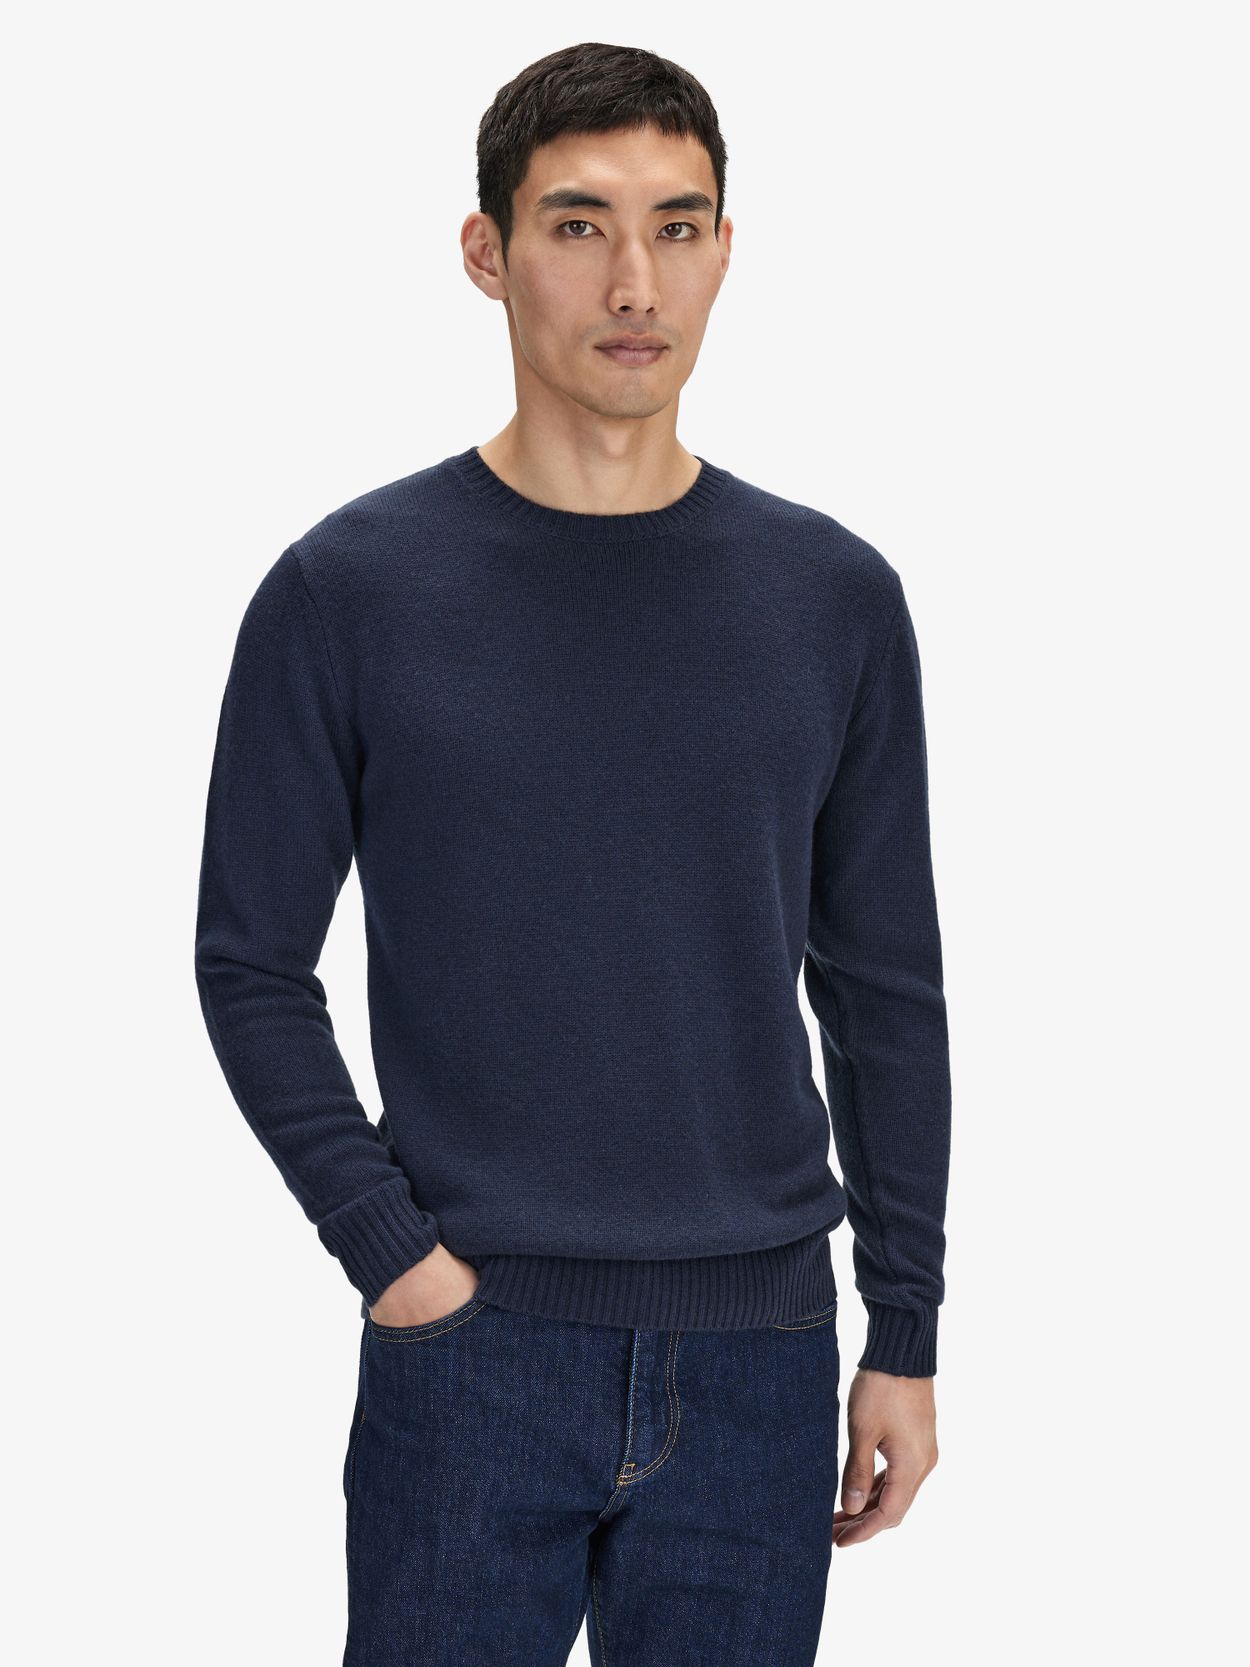 Blue Wool & Cashmere Sweater